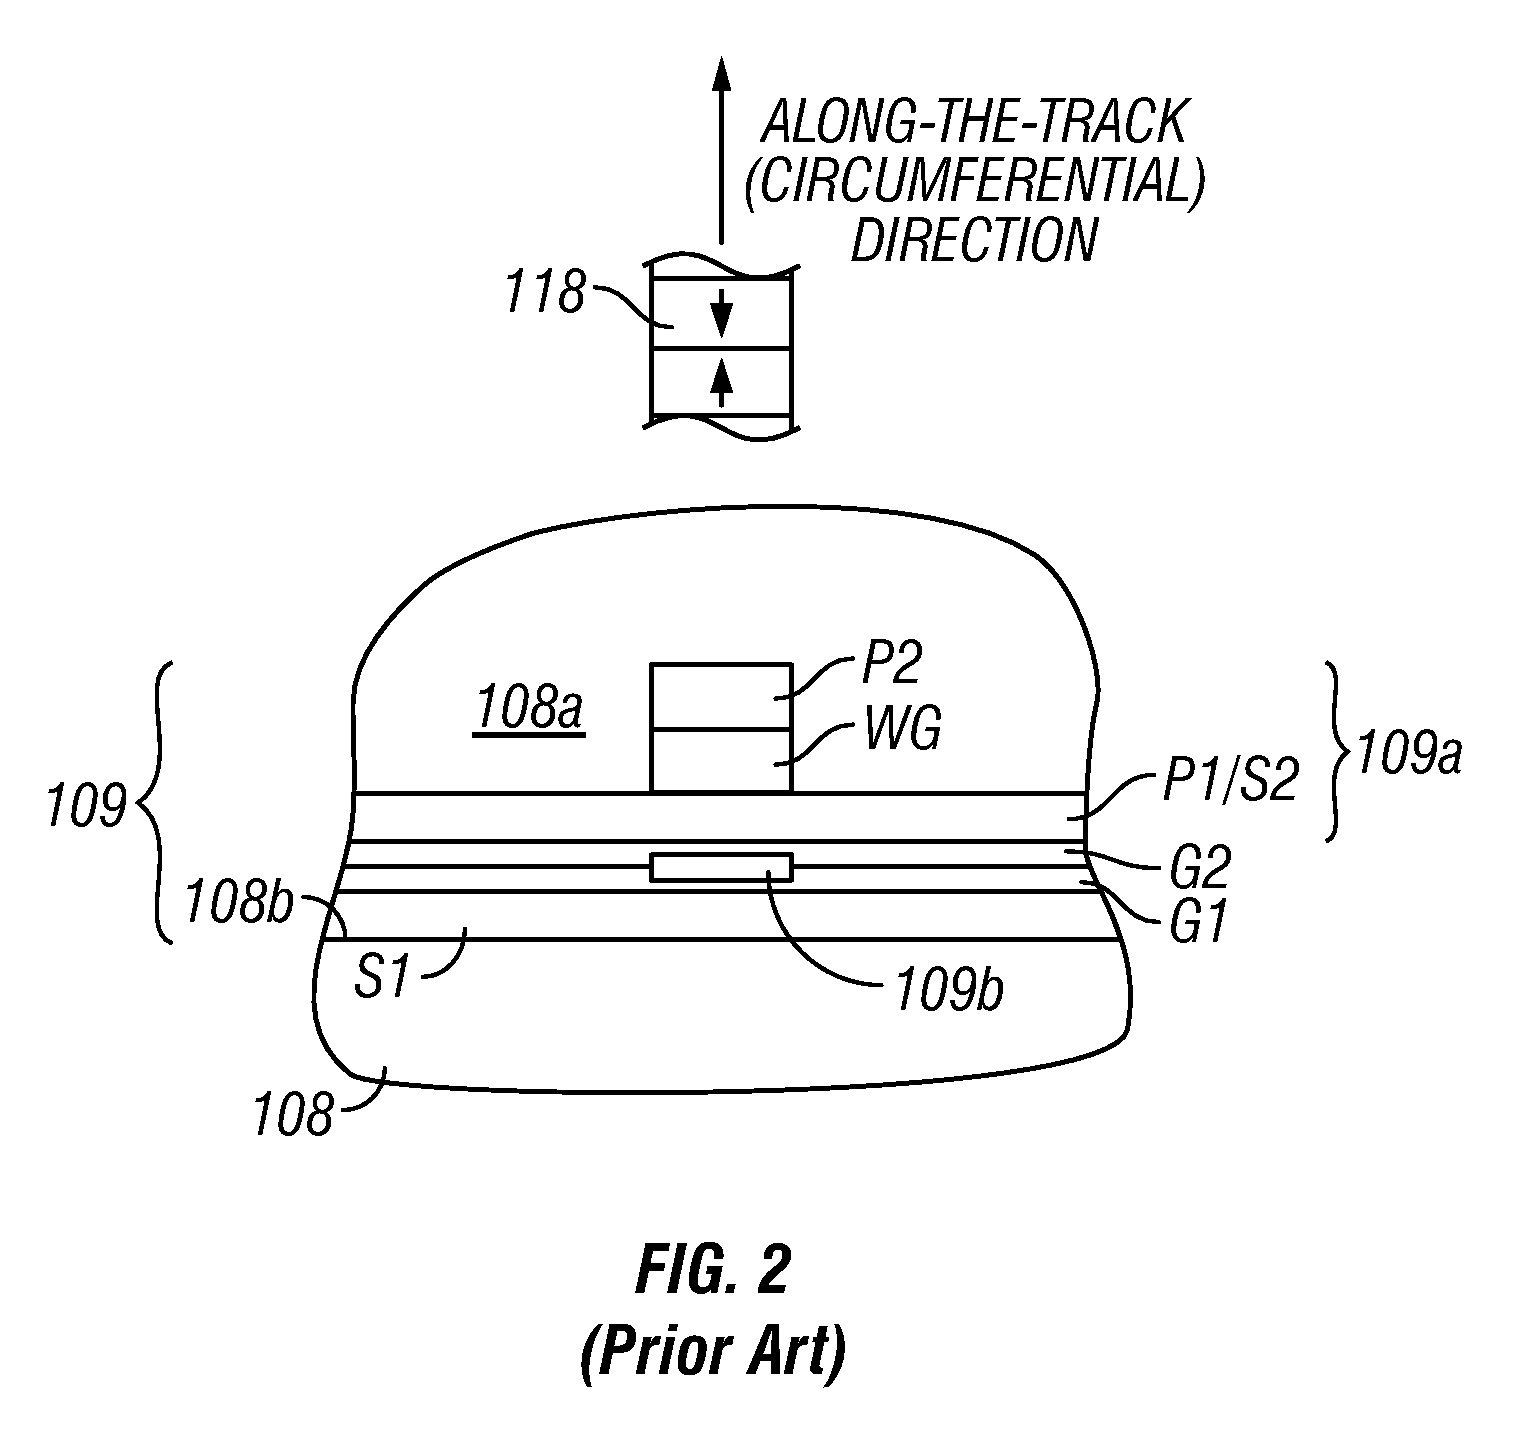 Magnetic recording disk and disk drive with patterned phase-type servo fields for read/write head positioning